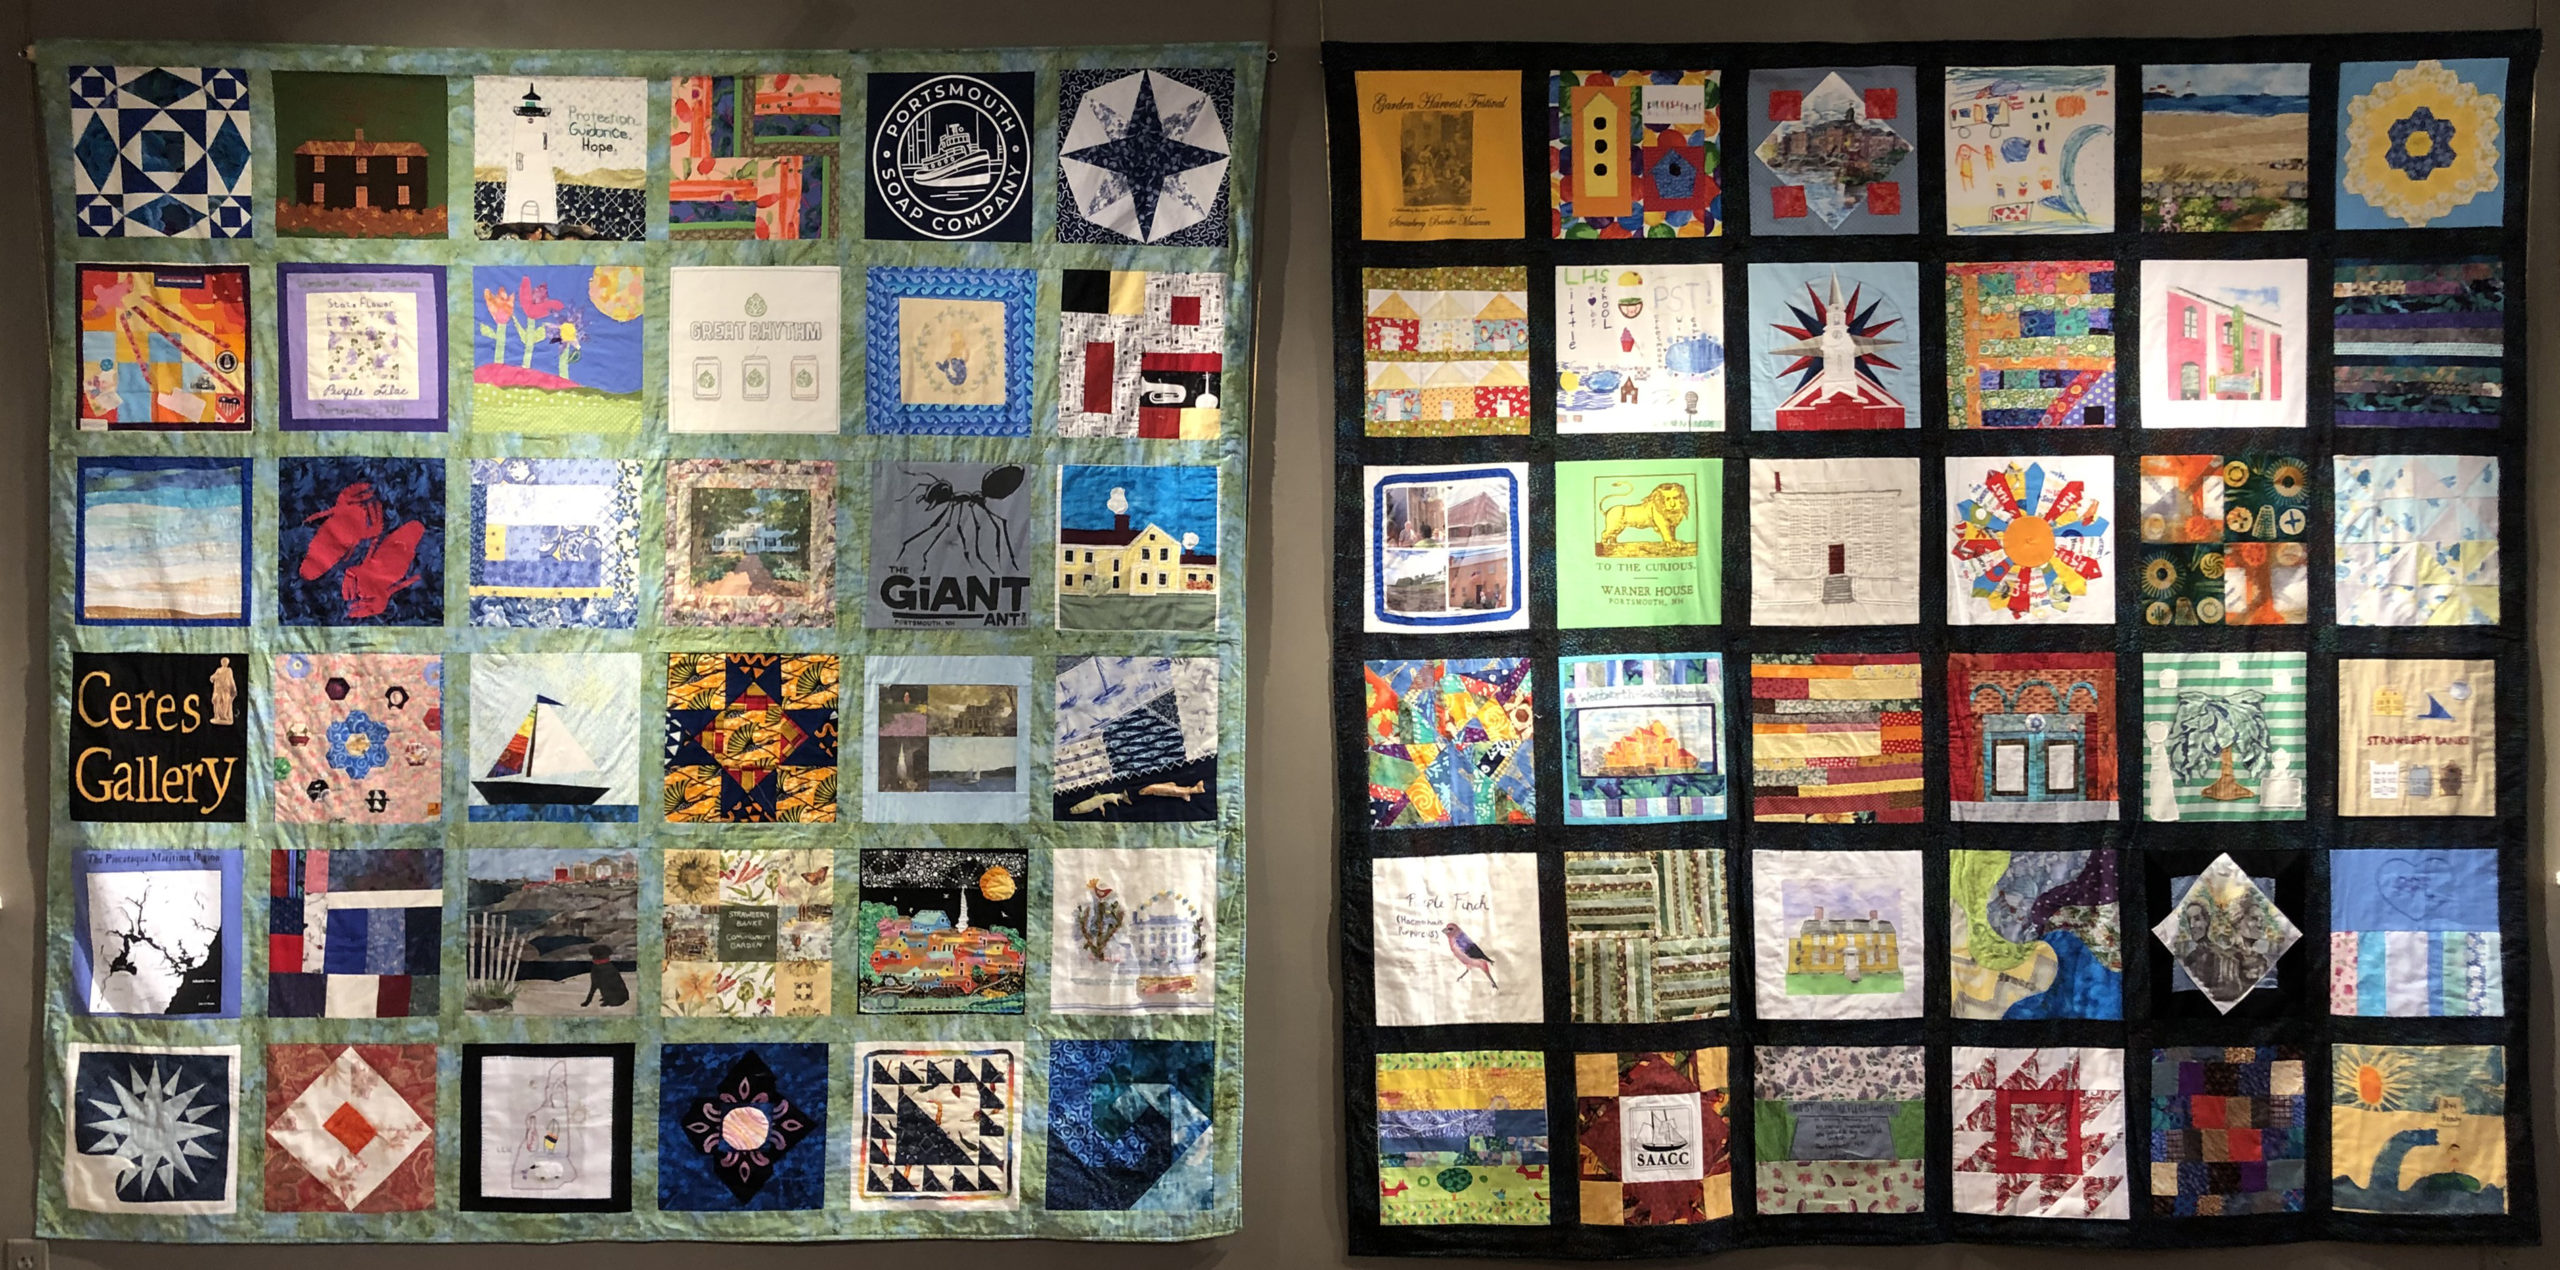 Community Quilts Are on Display!